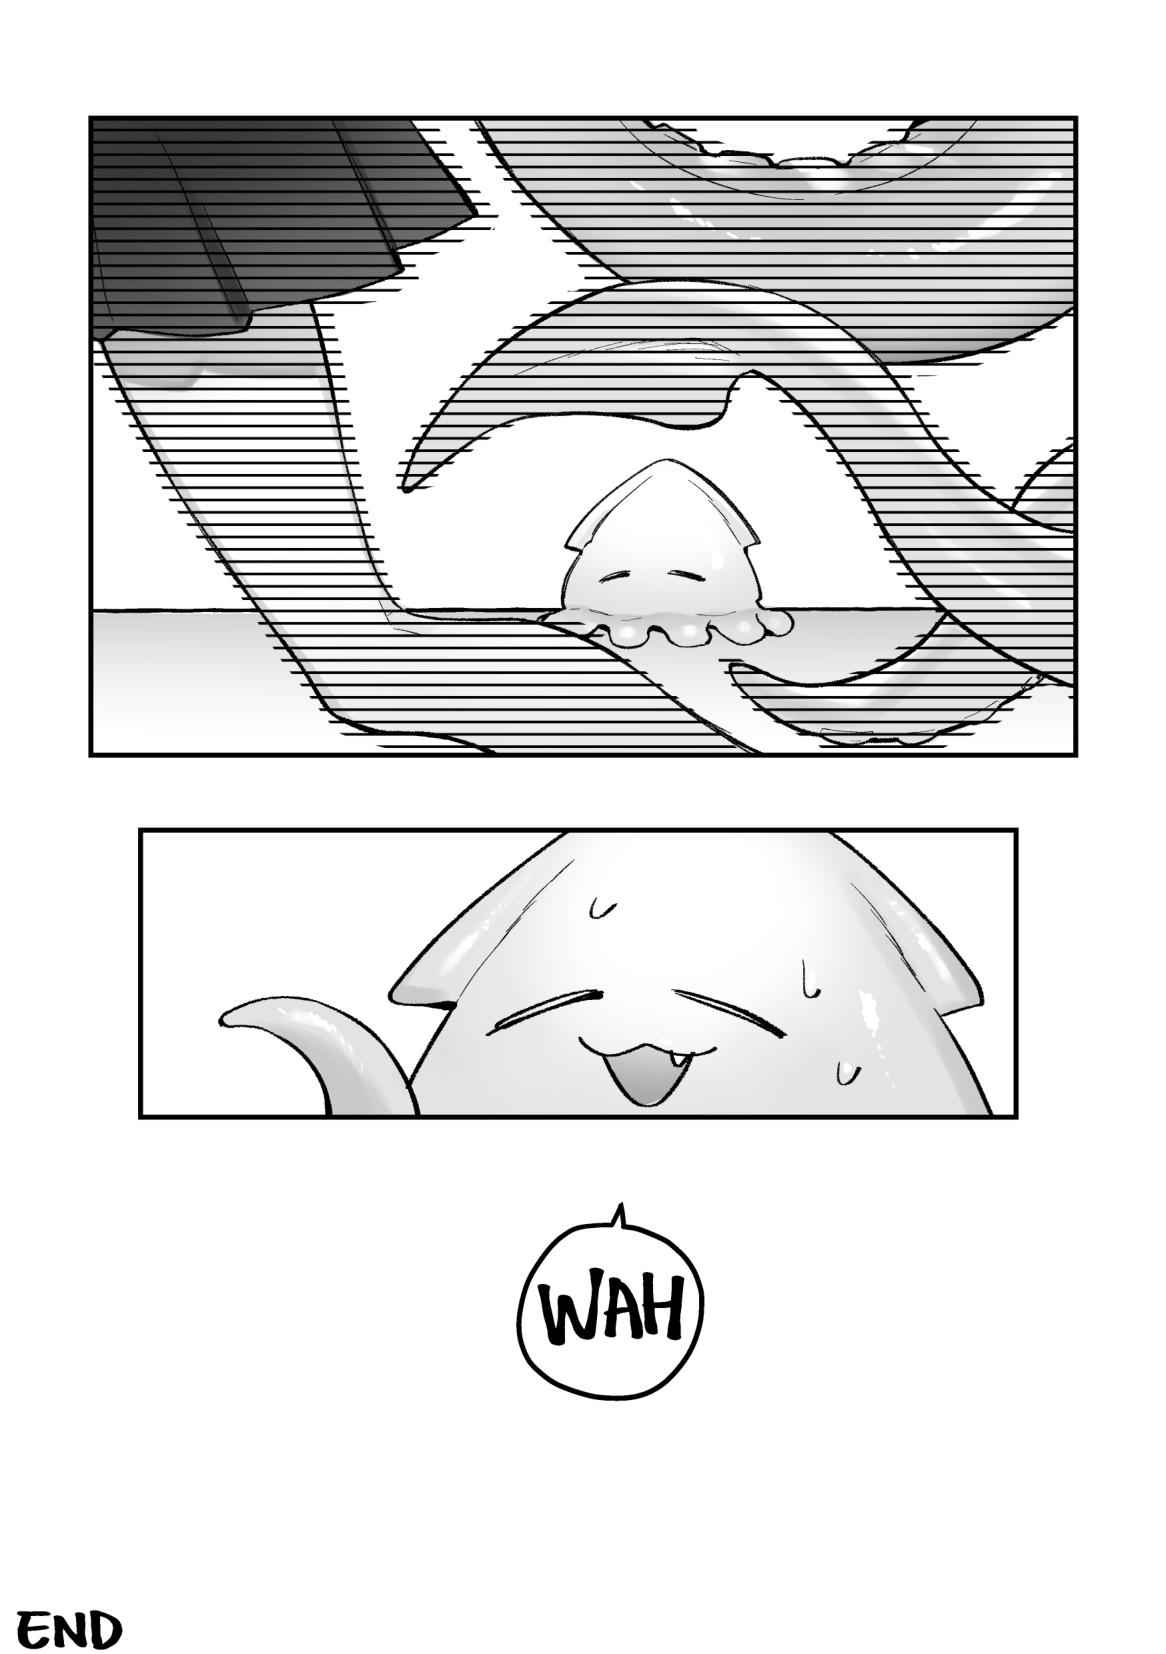 【R-18 Comic】Tentacle!! Ina's Boing Boing is out of control!! 18